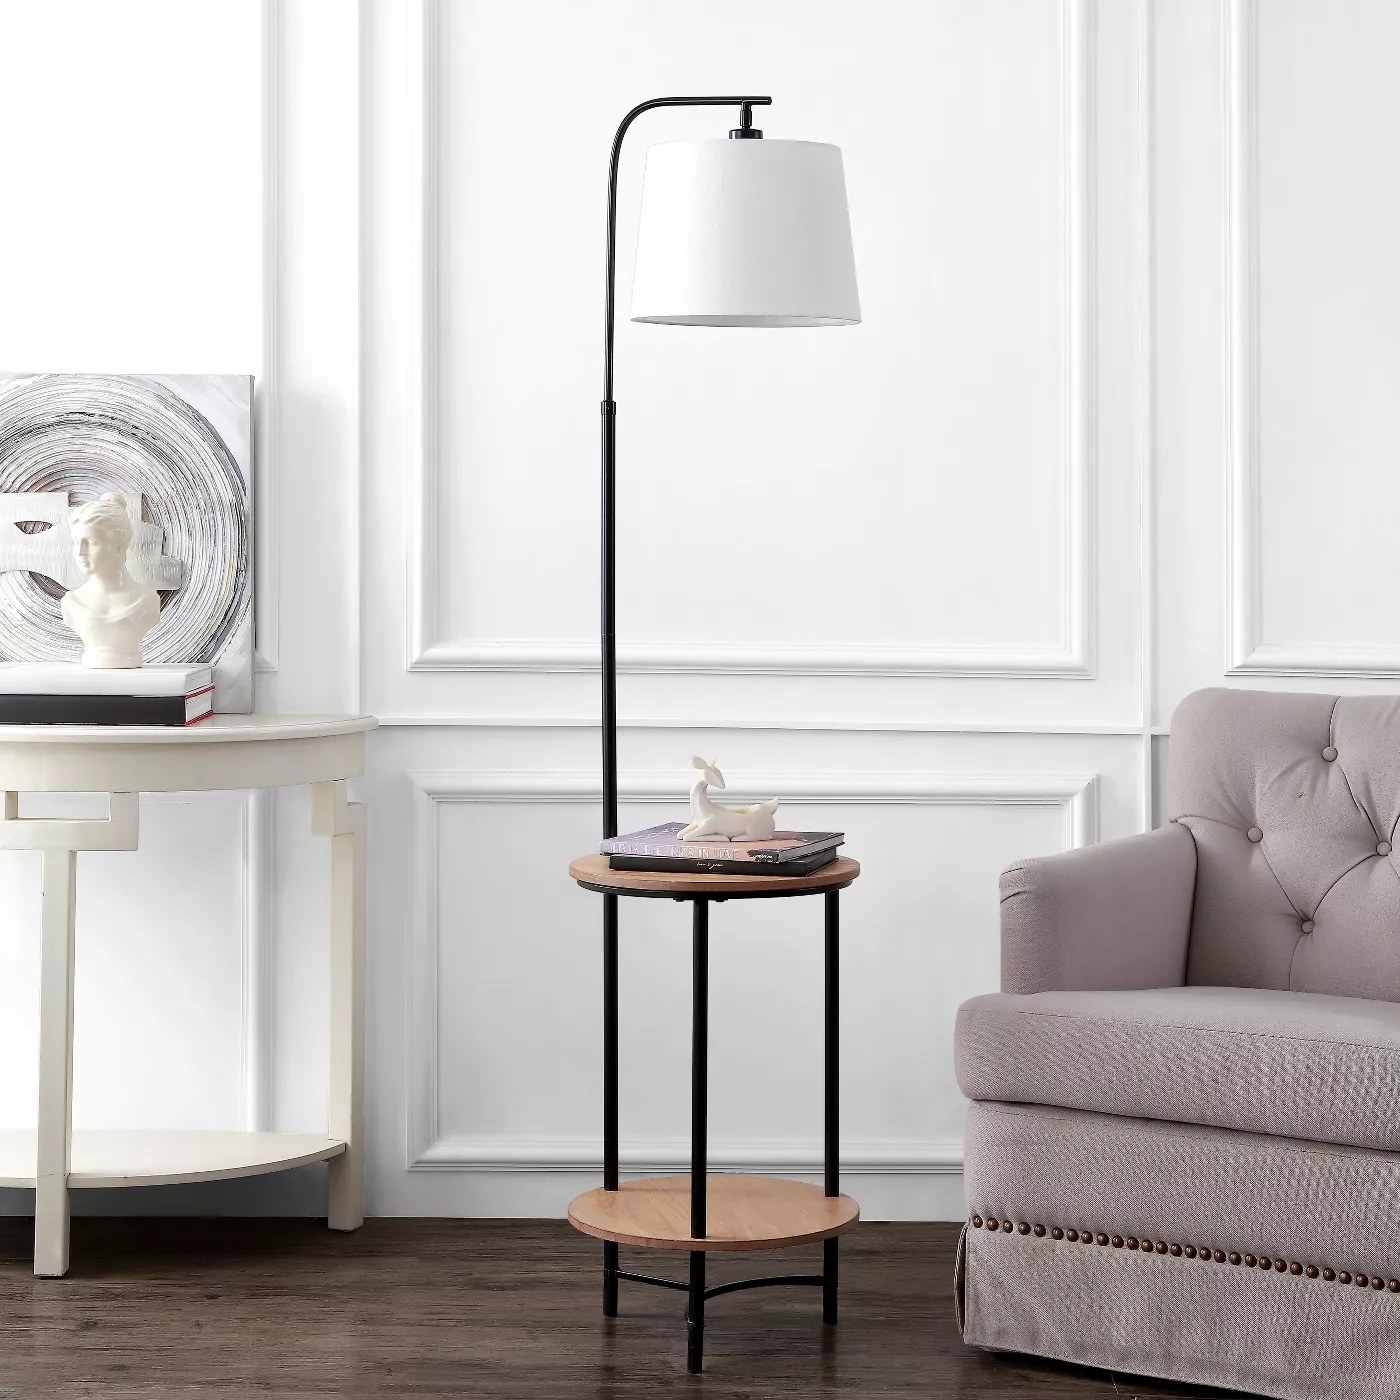 The floor lamp attached to an end table